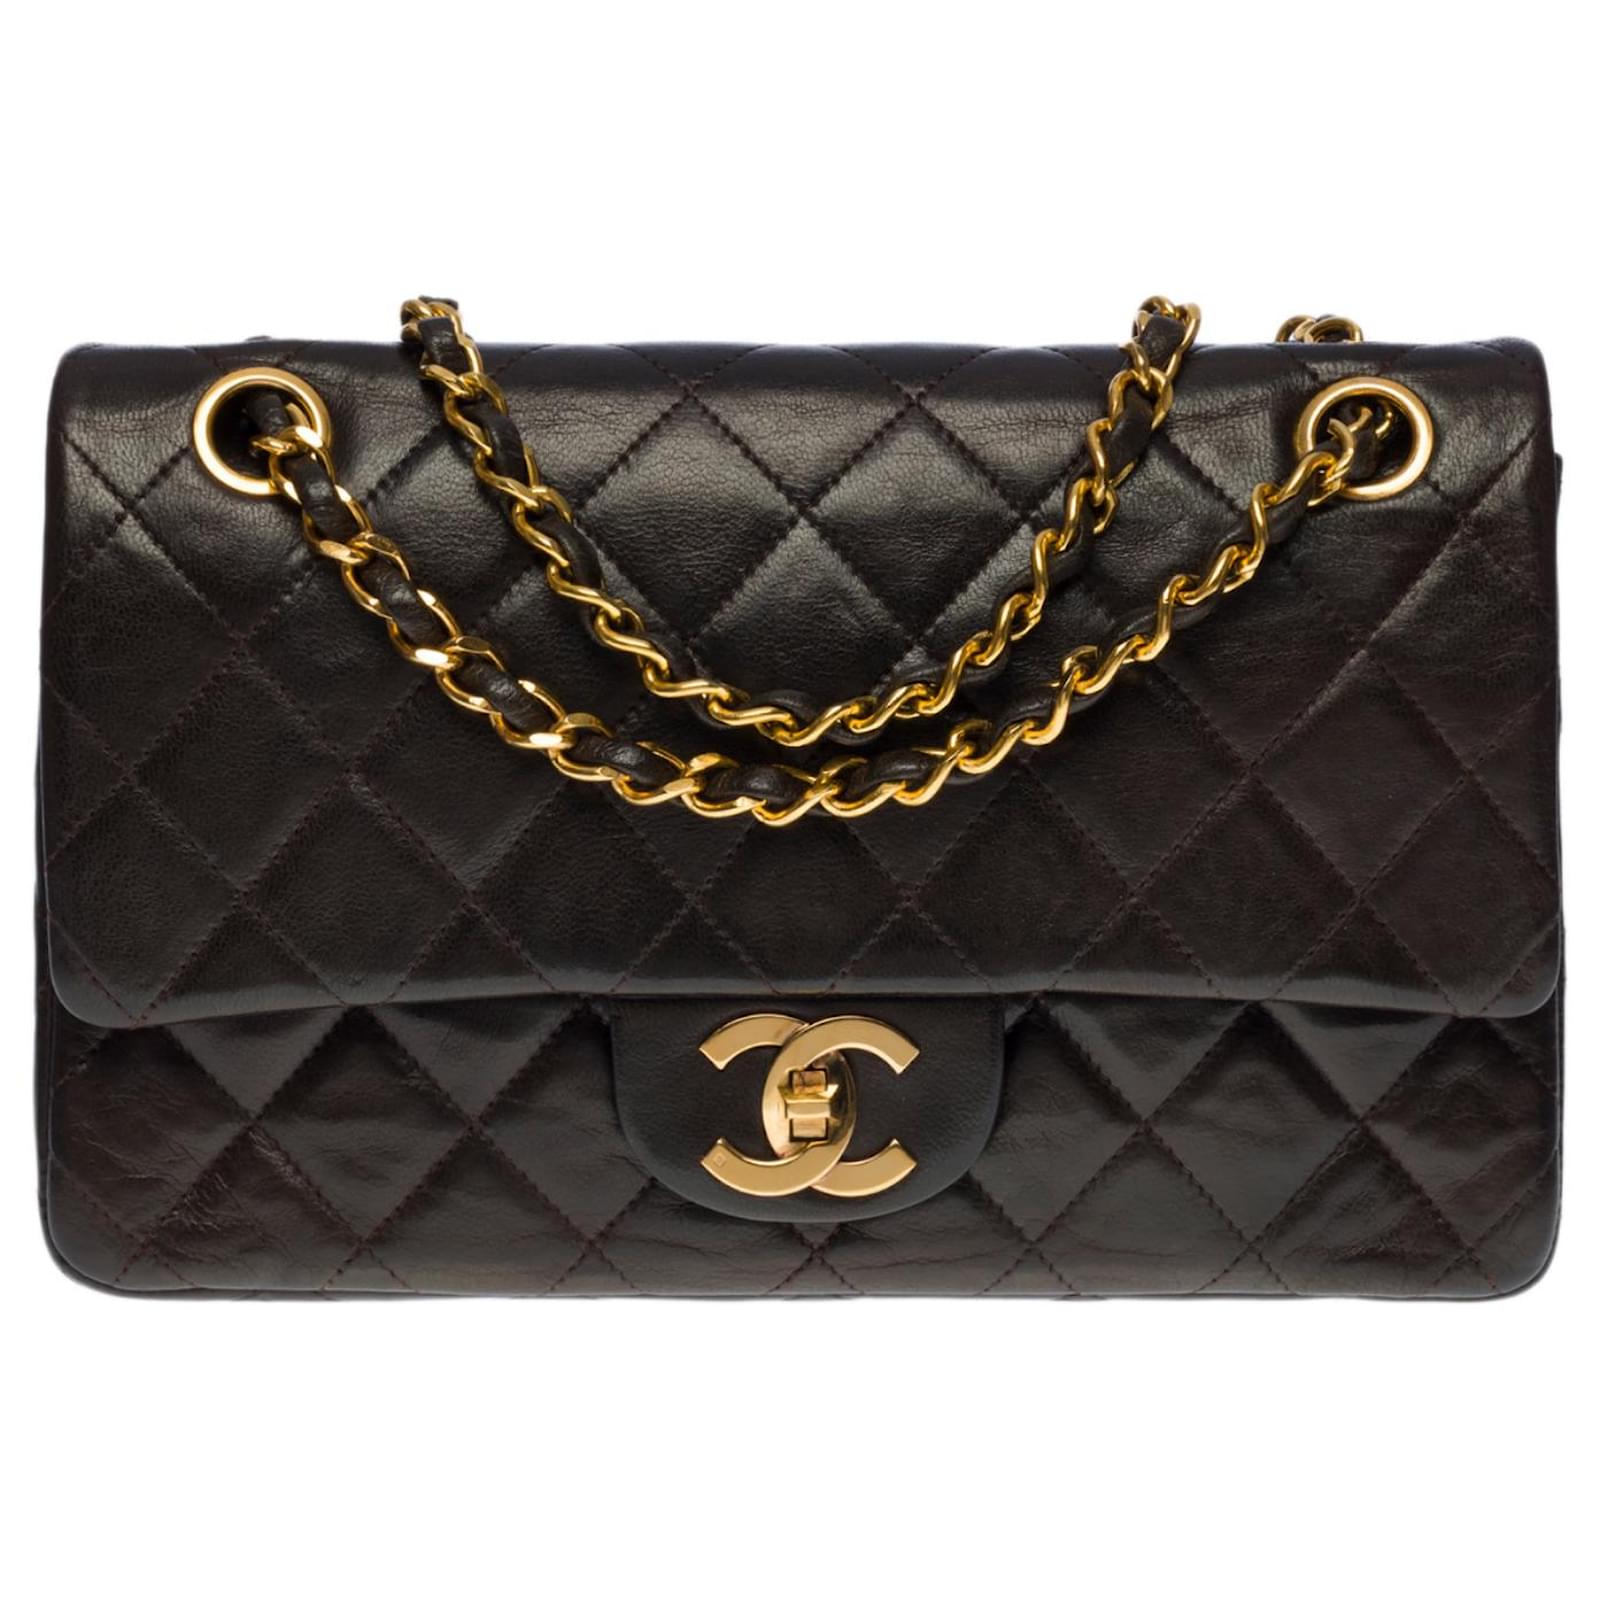 The coveted Chanel Timeless bag 22 cm with lined flap in dark brown ...